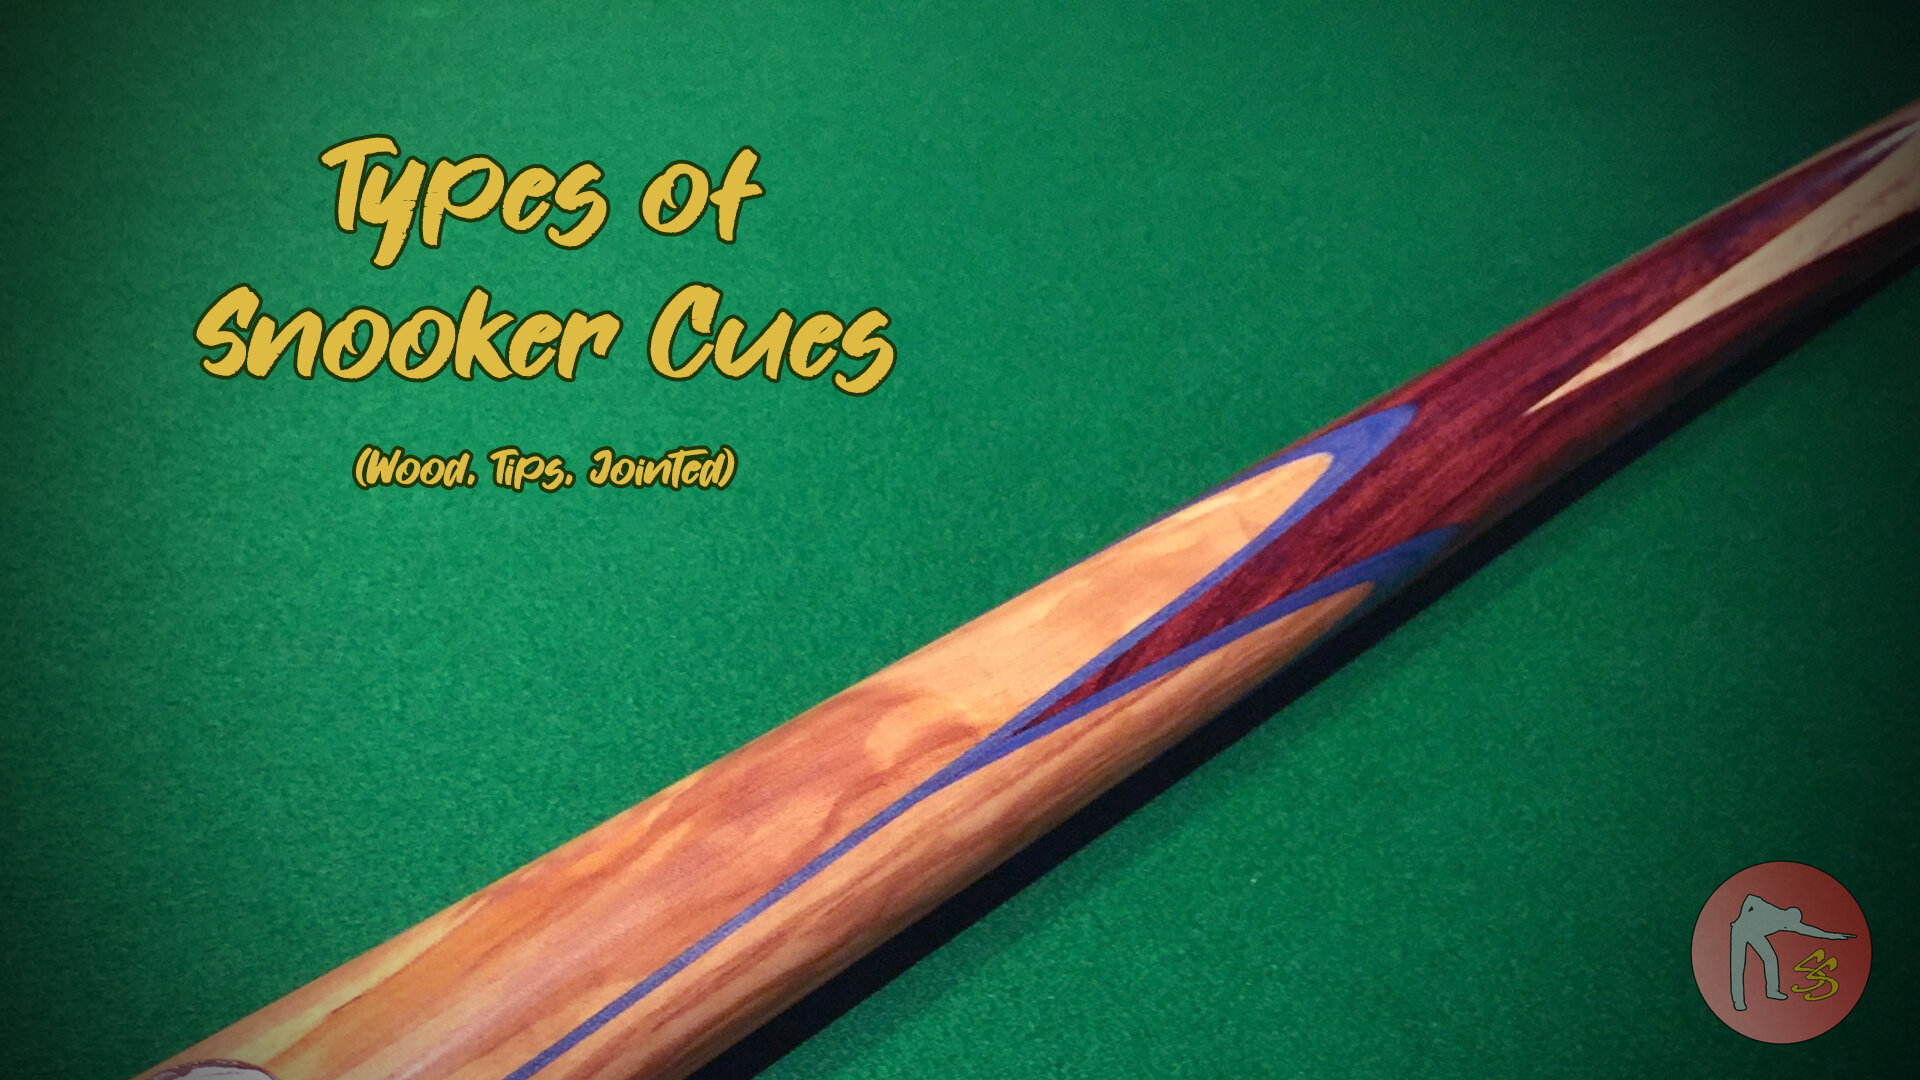 ELK-PRO SNOOKER & POOL CUE TIPS  CHESWORTH CUES SHEFFIELD   Worldwide Dispatch 